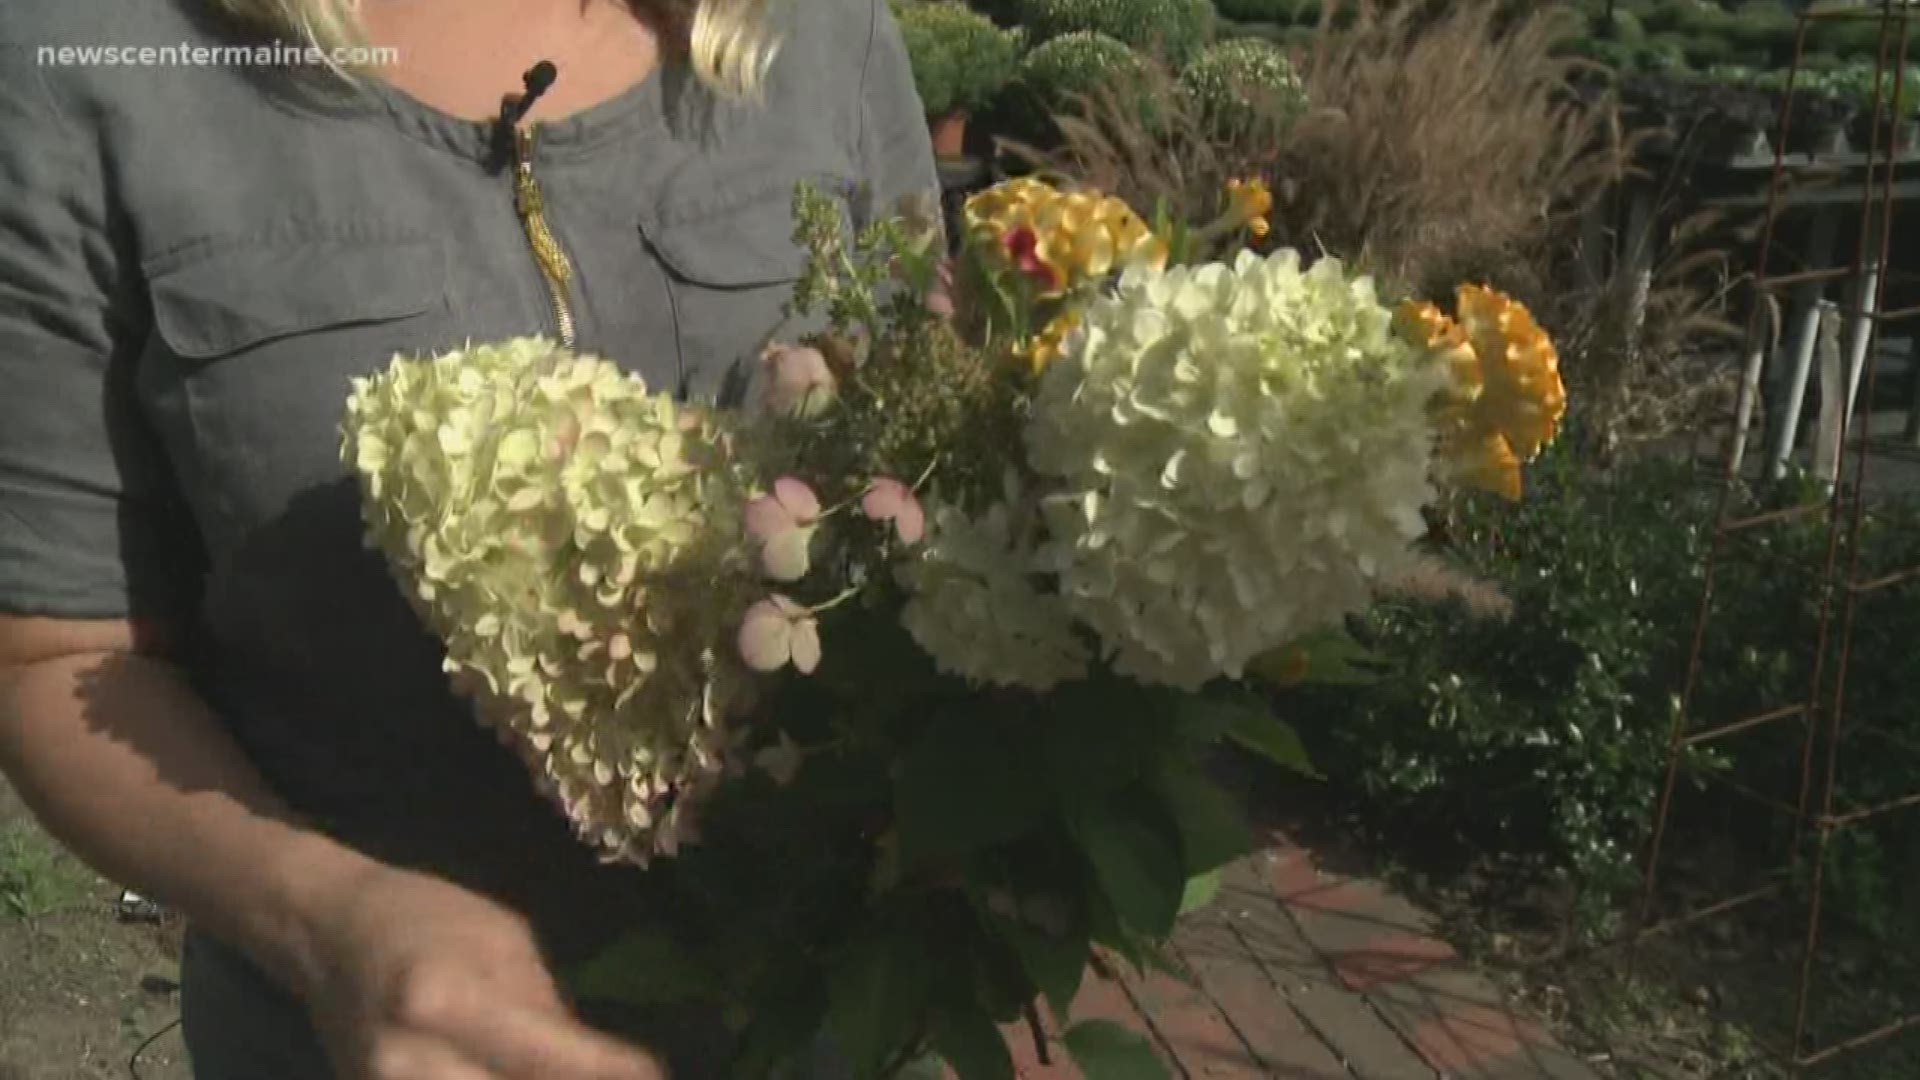 NEWS CENTER Maine's Cindy Williams talks with Ashley Dyer of Farmhouse Floral about Flower arrangements in fall.